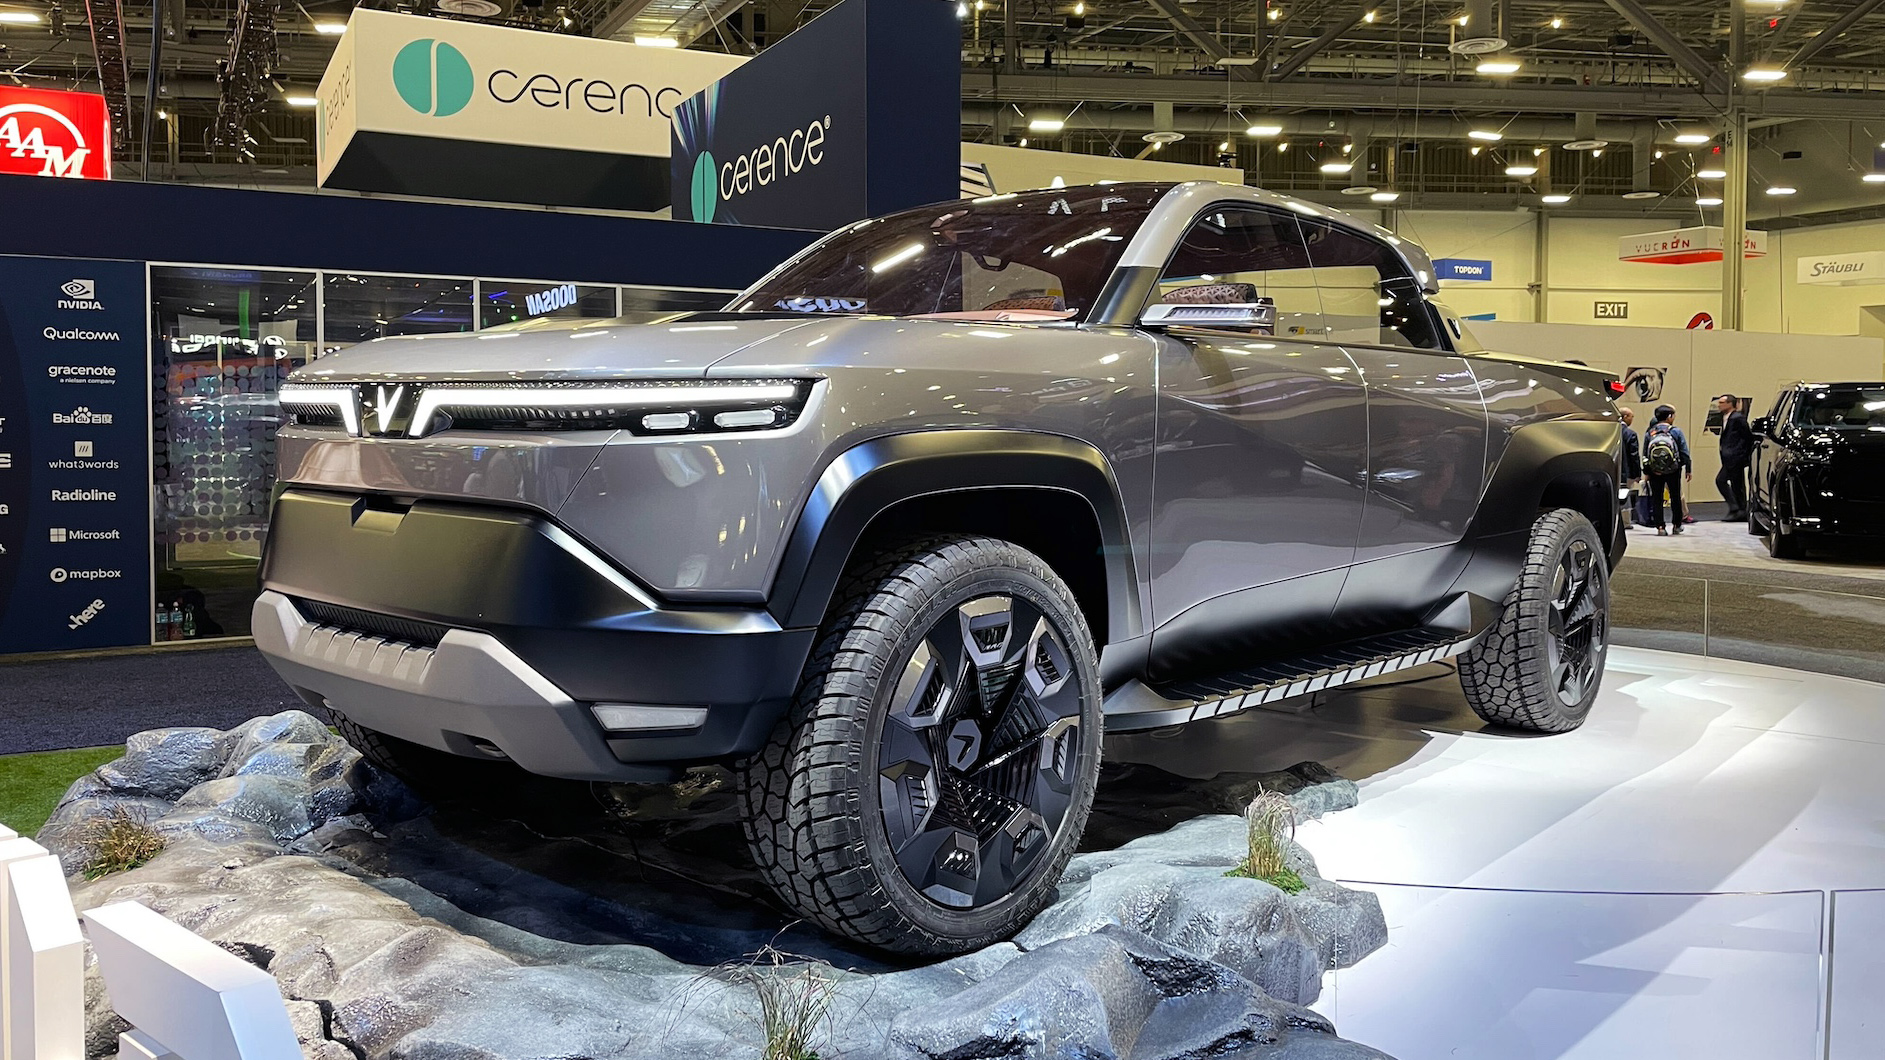 Here’s What the VinFast Pickup Truck Will Look Like, If It Ever Comes Out